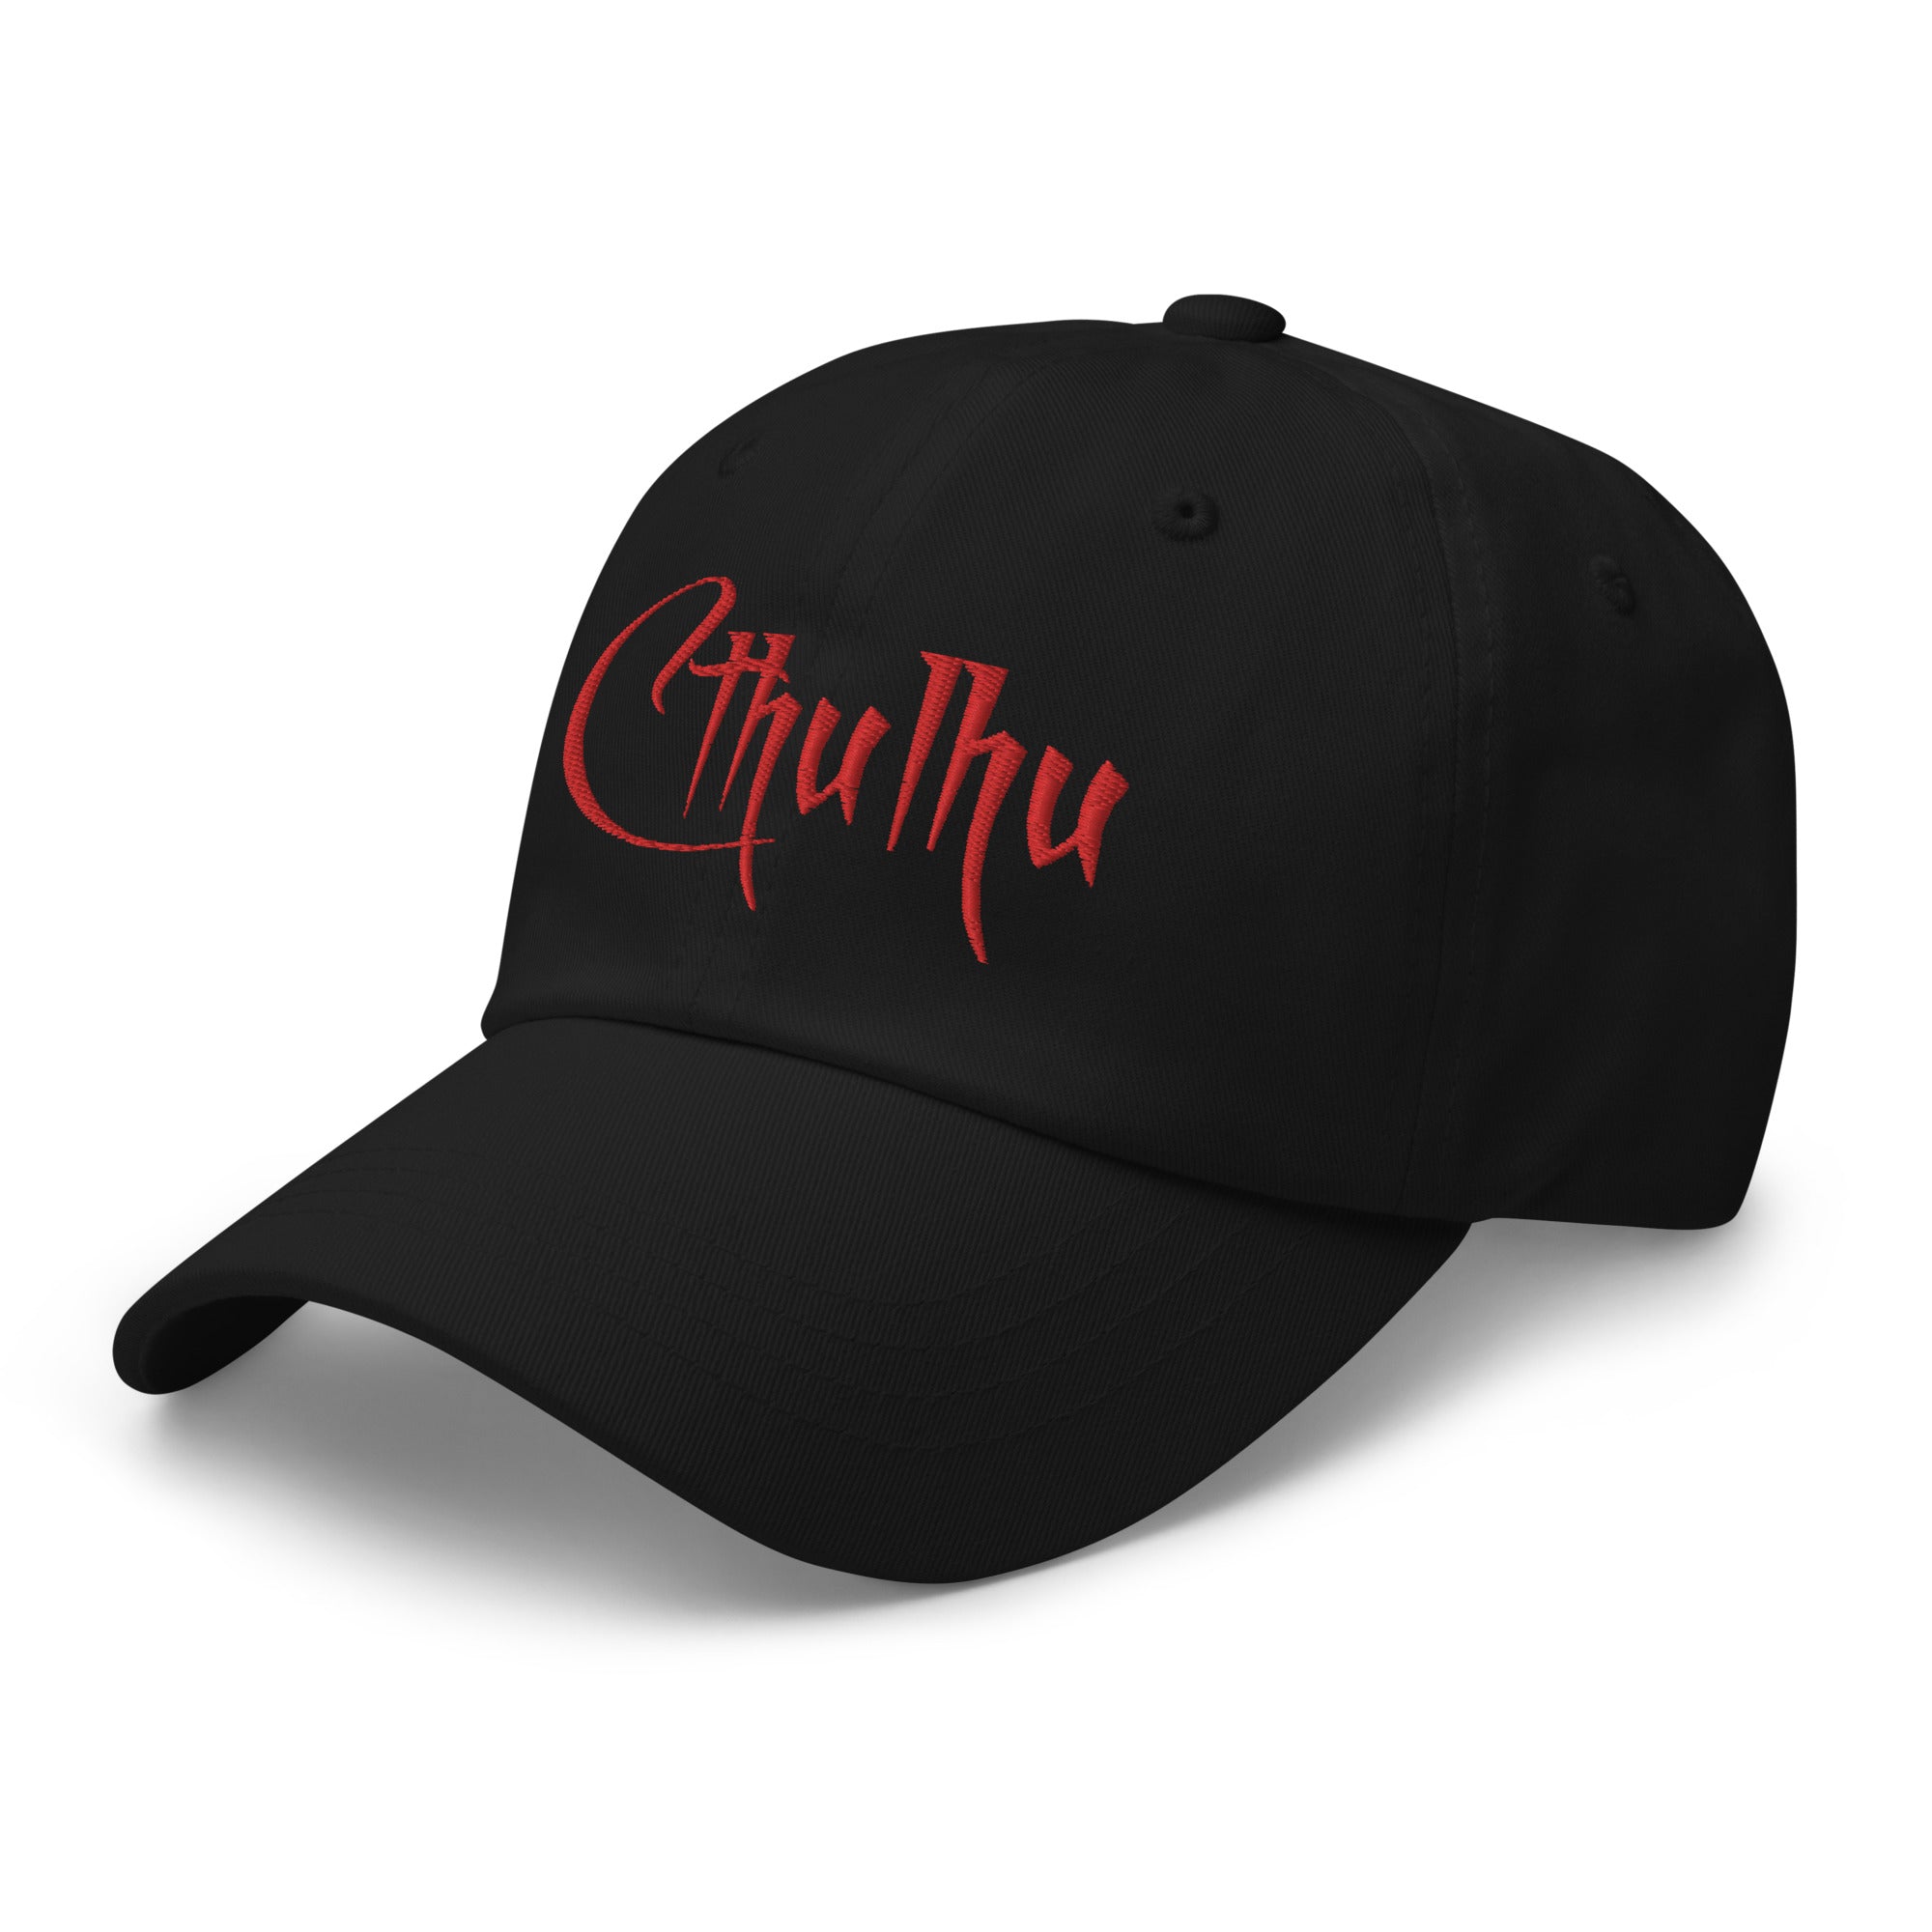 Call of Cthulhu The Great Old Ones Embroidered Baseball Cap Dad hat - Edge of Life Designs